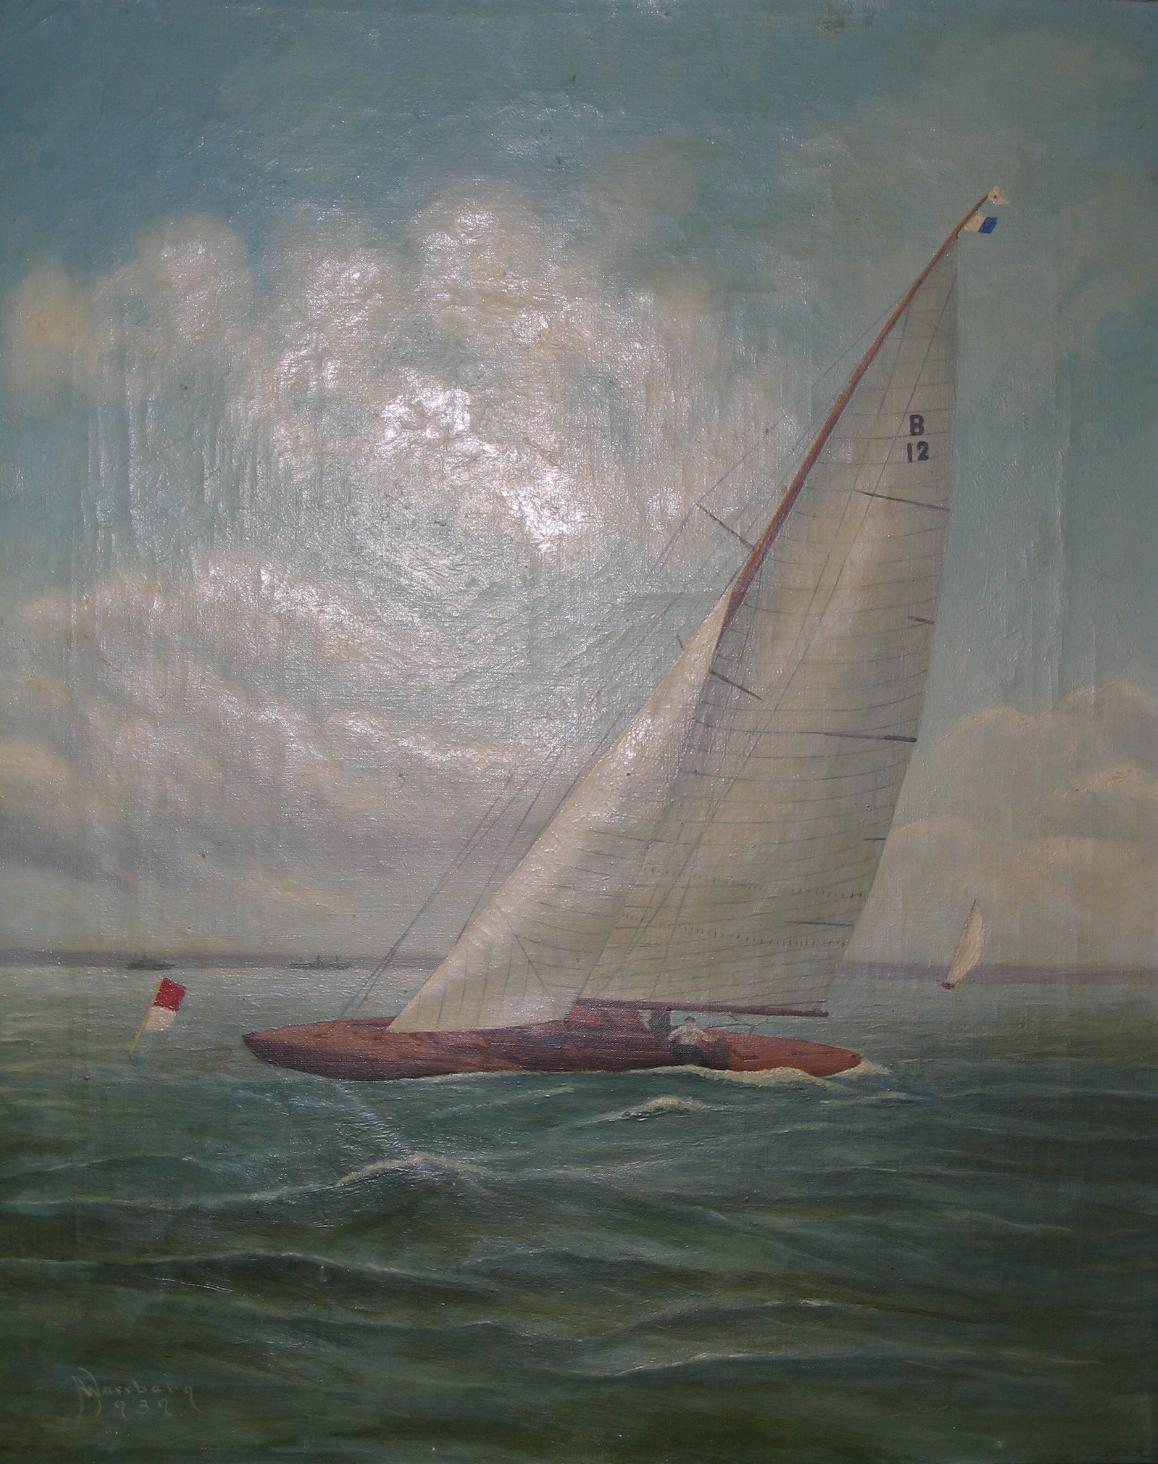 The oil painting of Trumph from 1939 by Alvin Wassberg. Photo ©Magnus Swahn